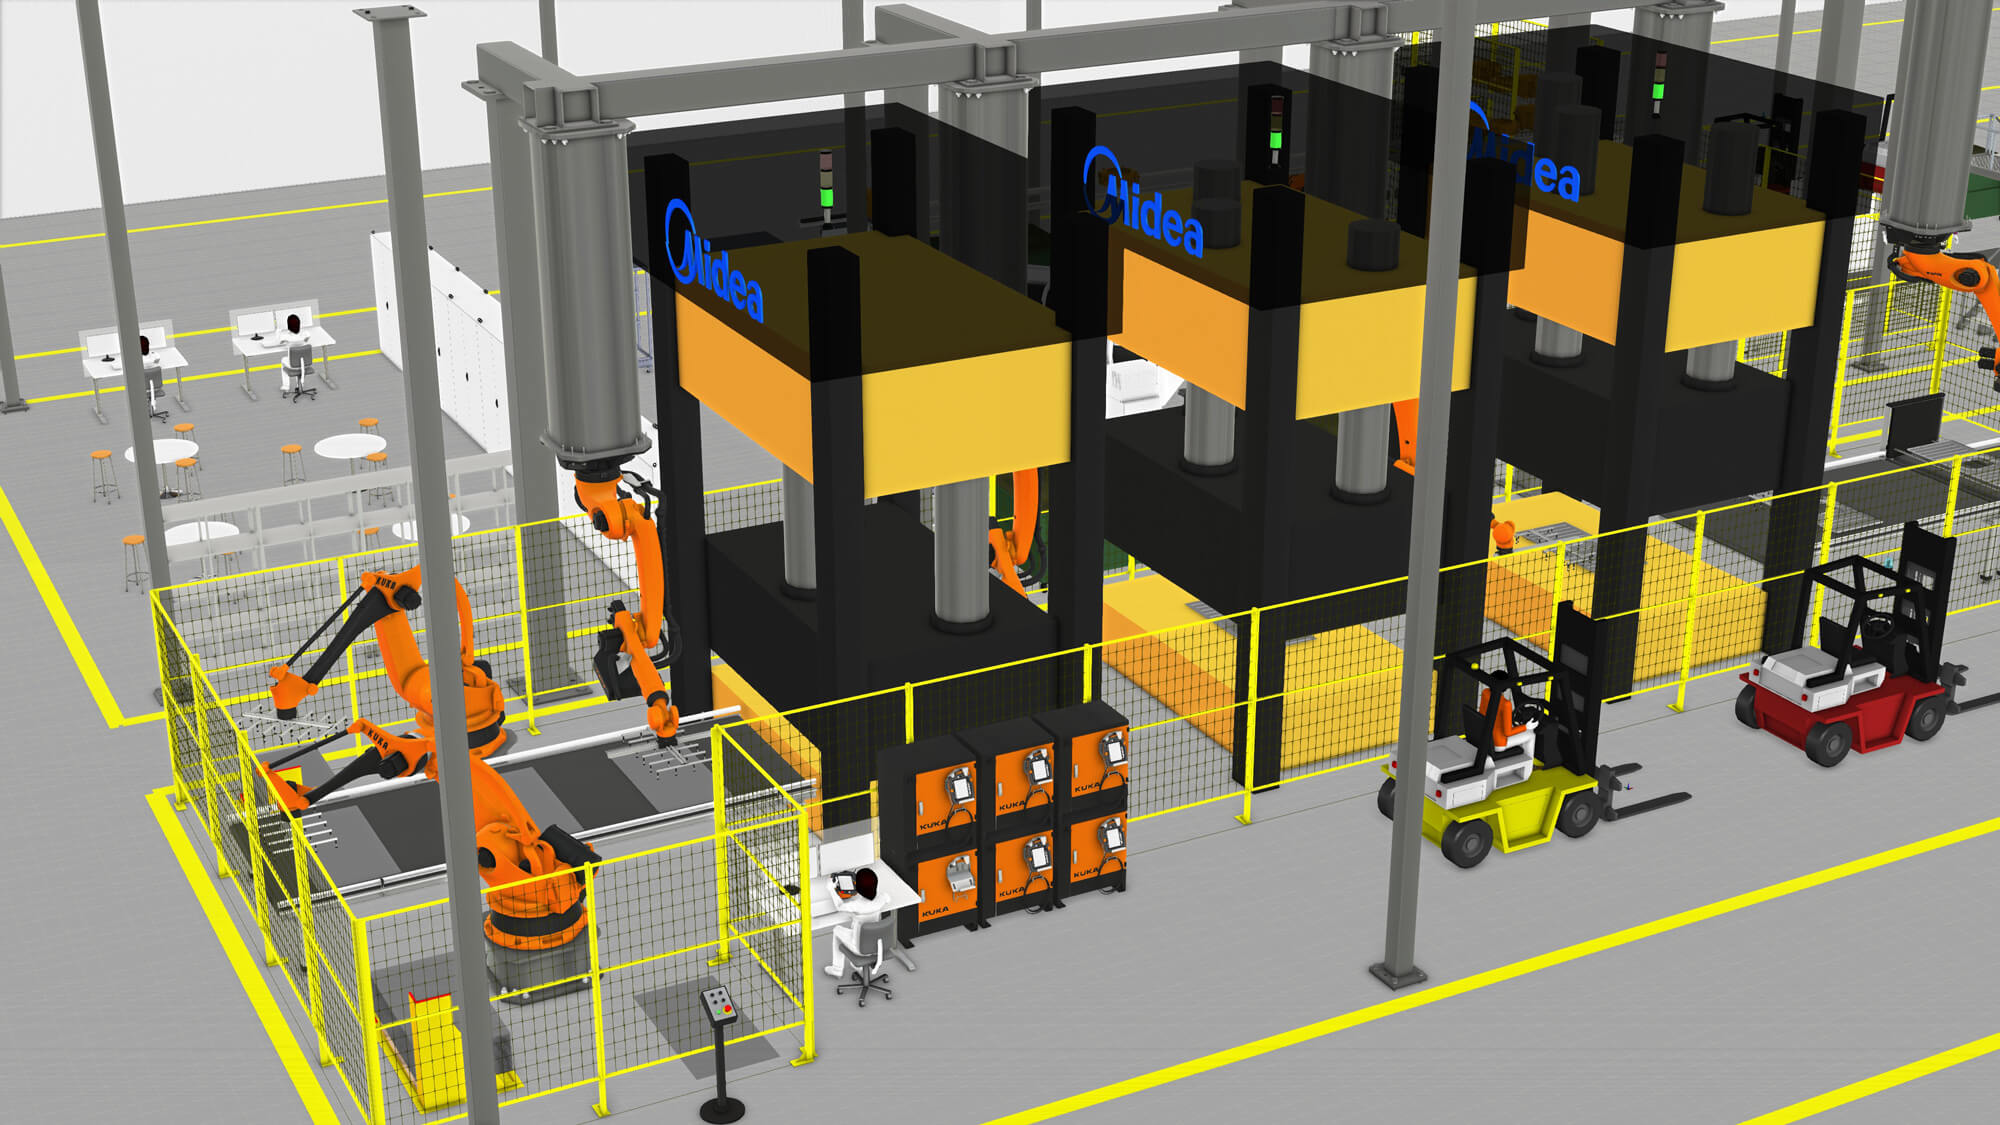 Simulation of a Midea box assembly line